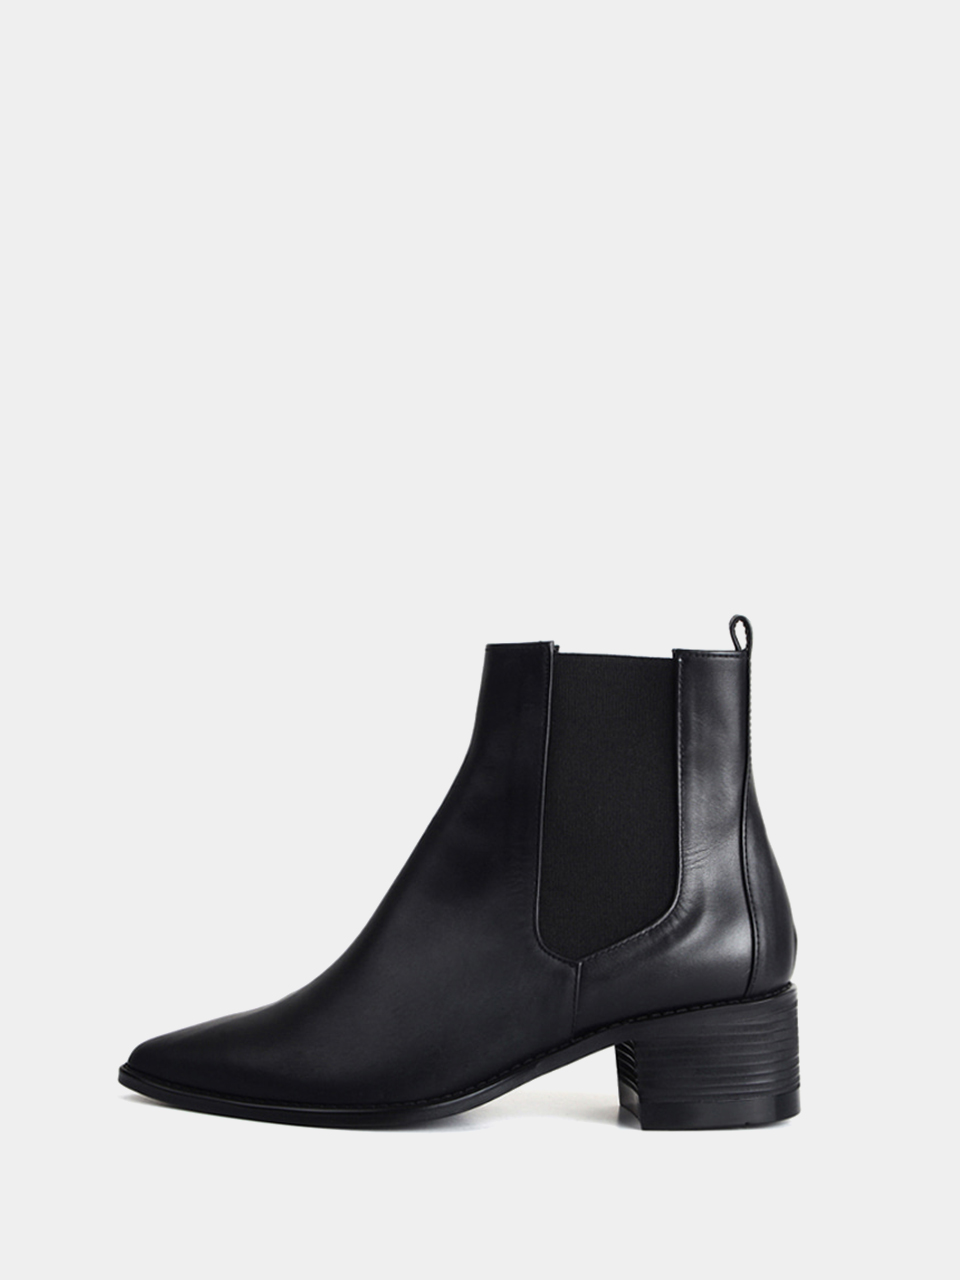 [Out of stock] Mrc005 CHELSEA BOOTS (Black)